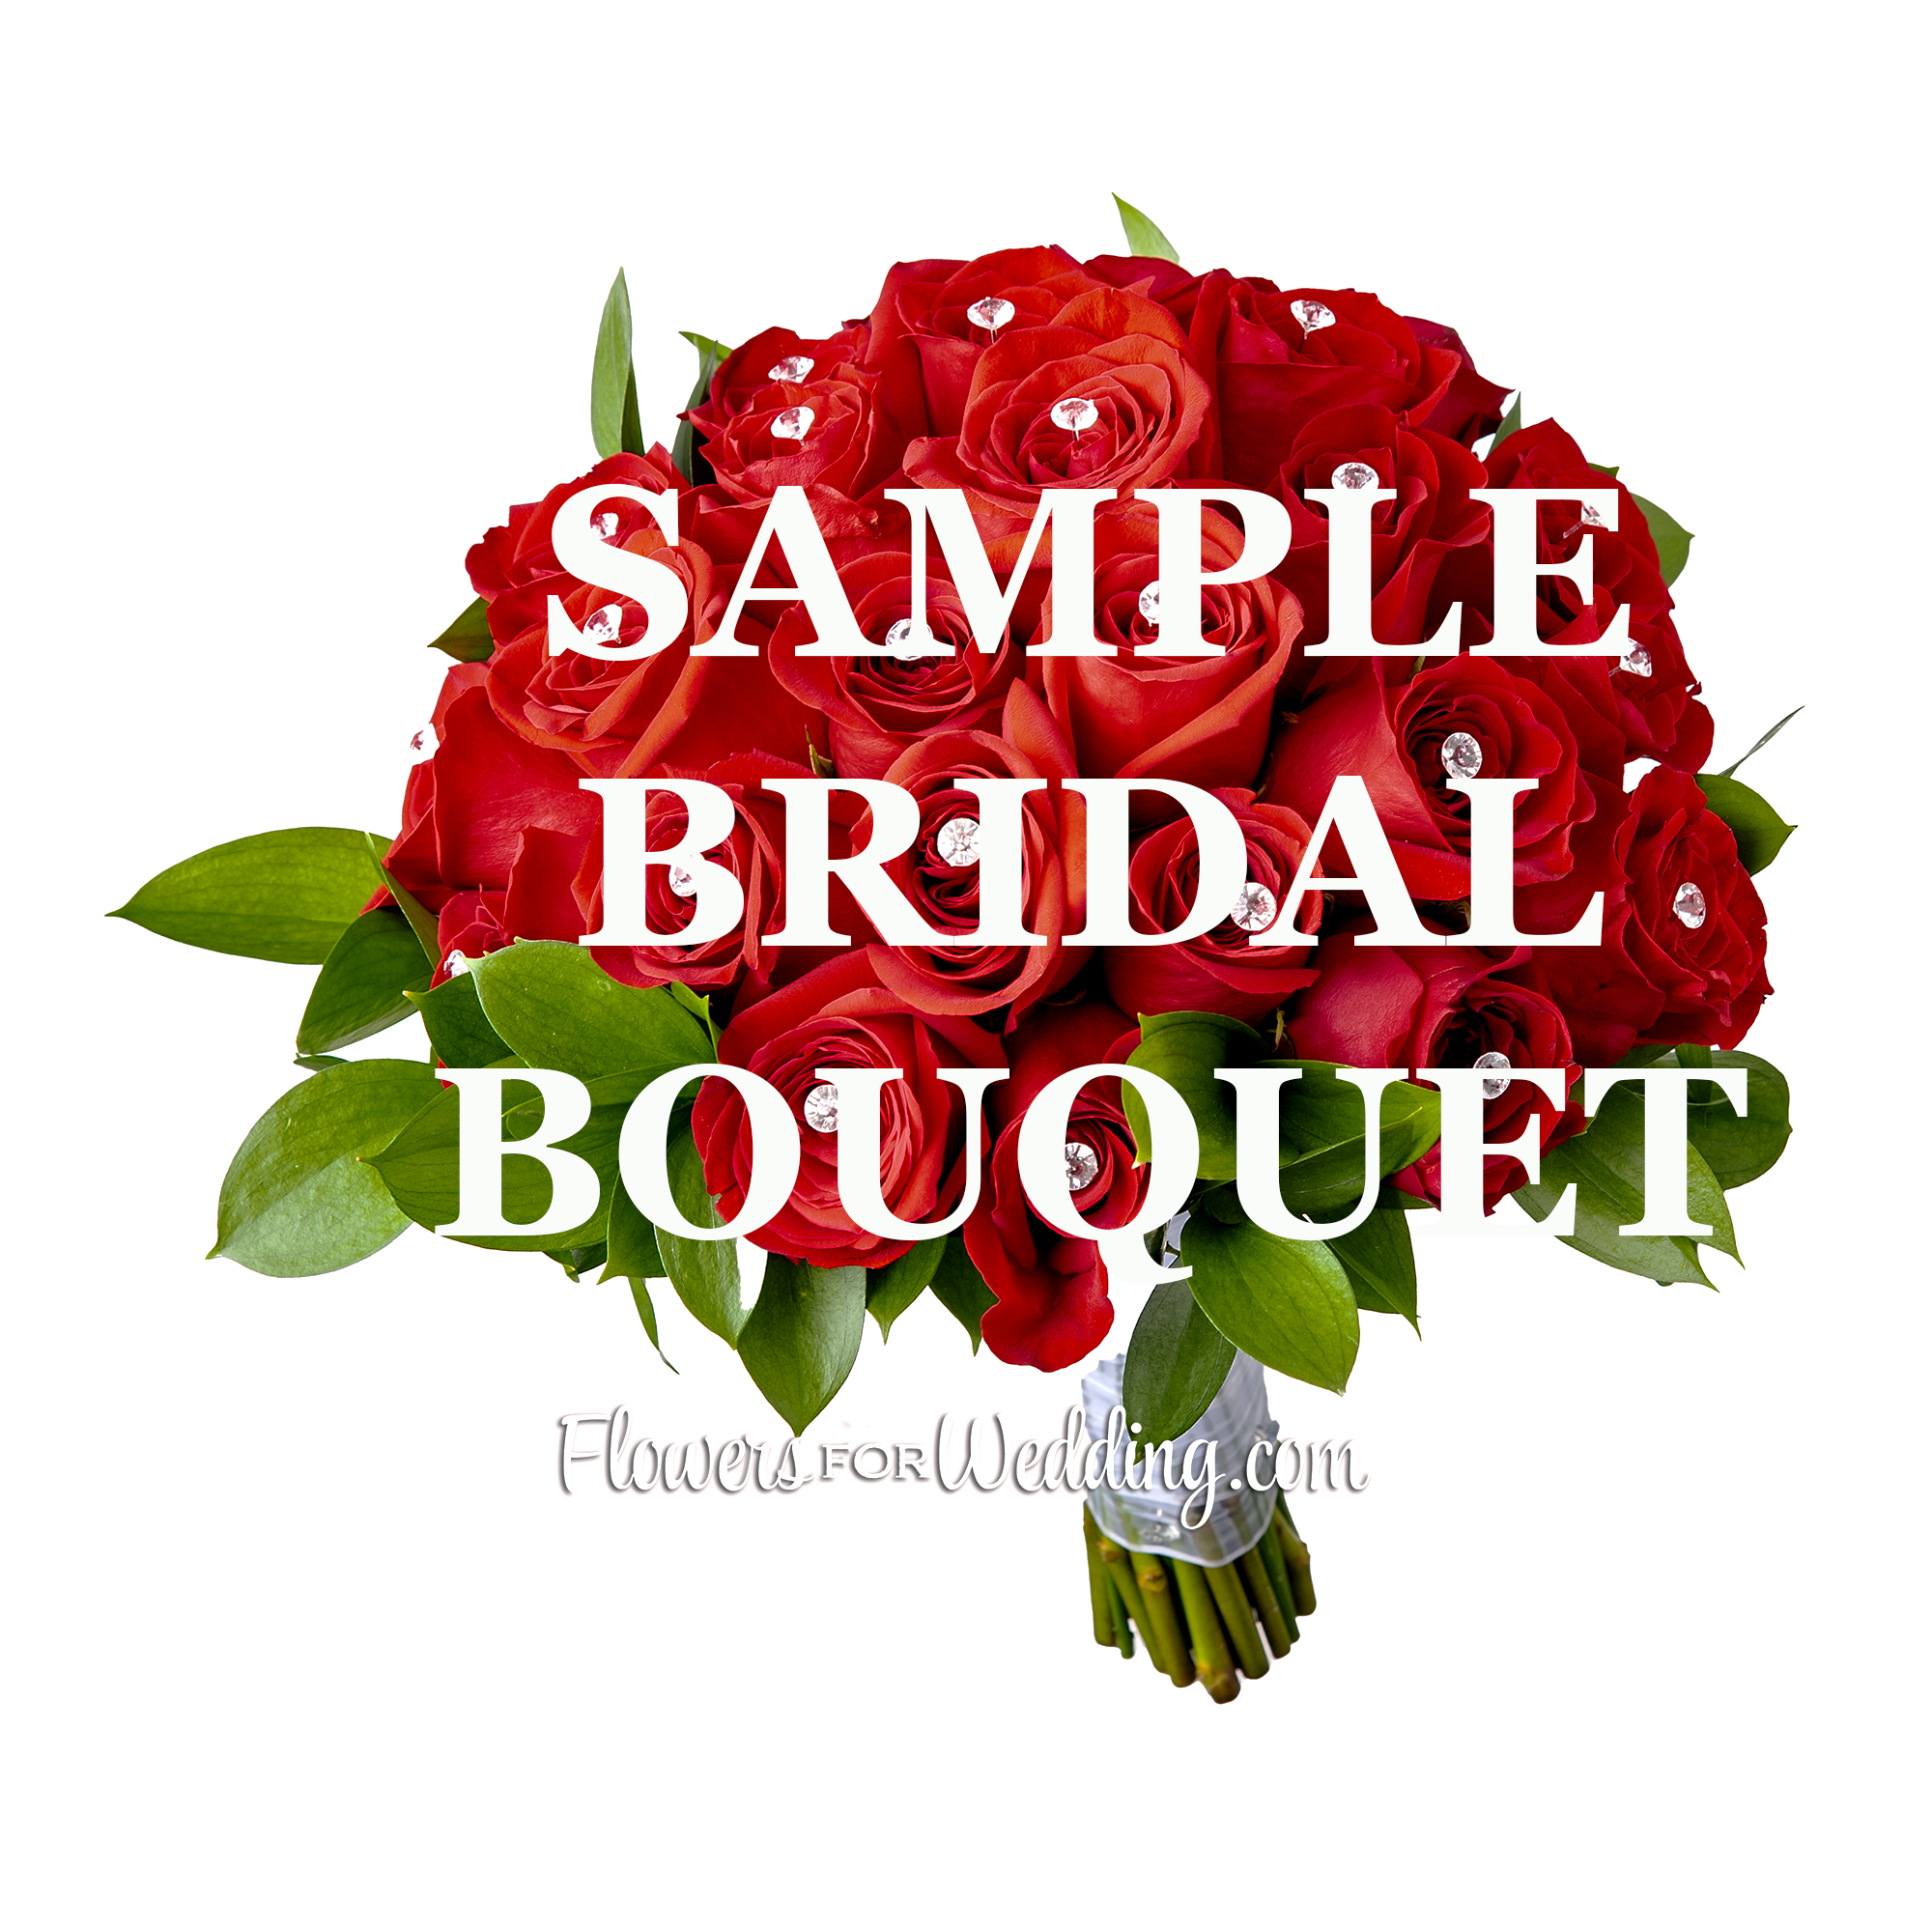 sample bridal bouquet dazzling red